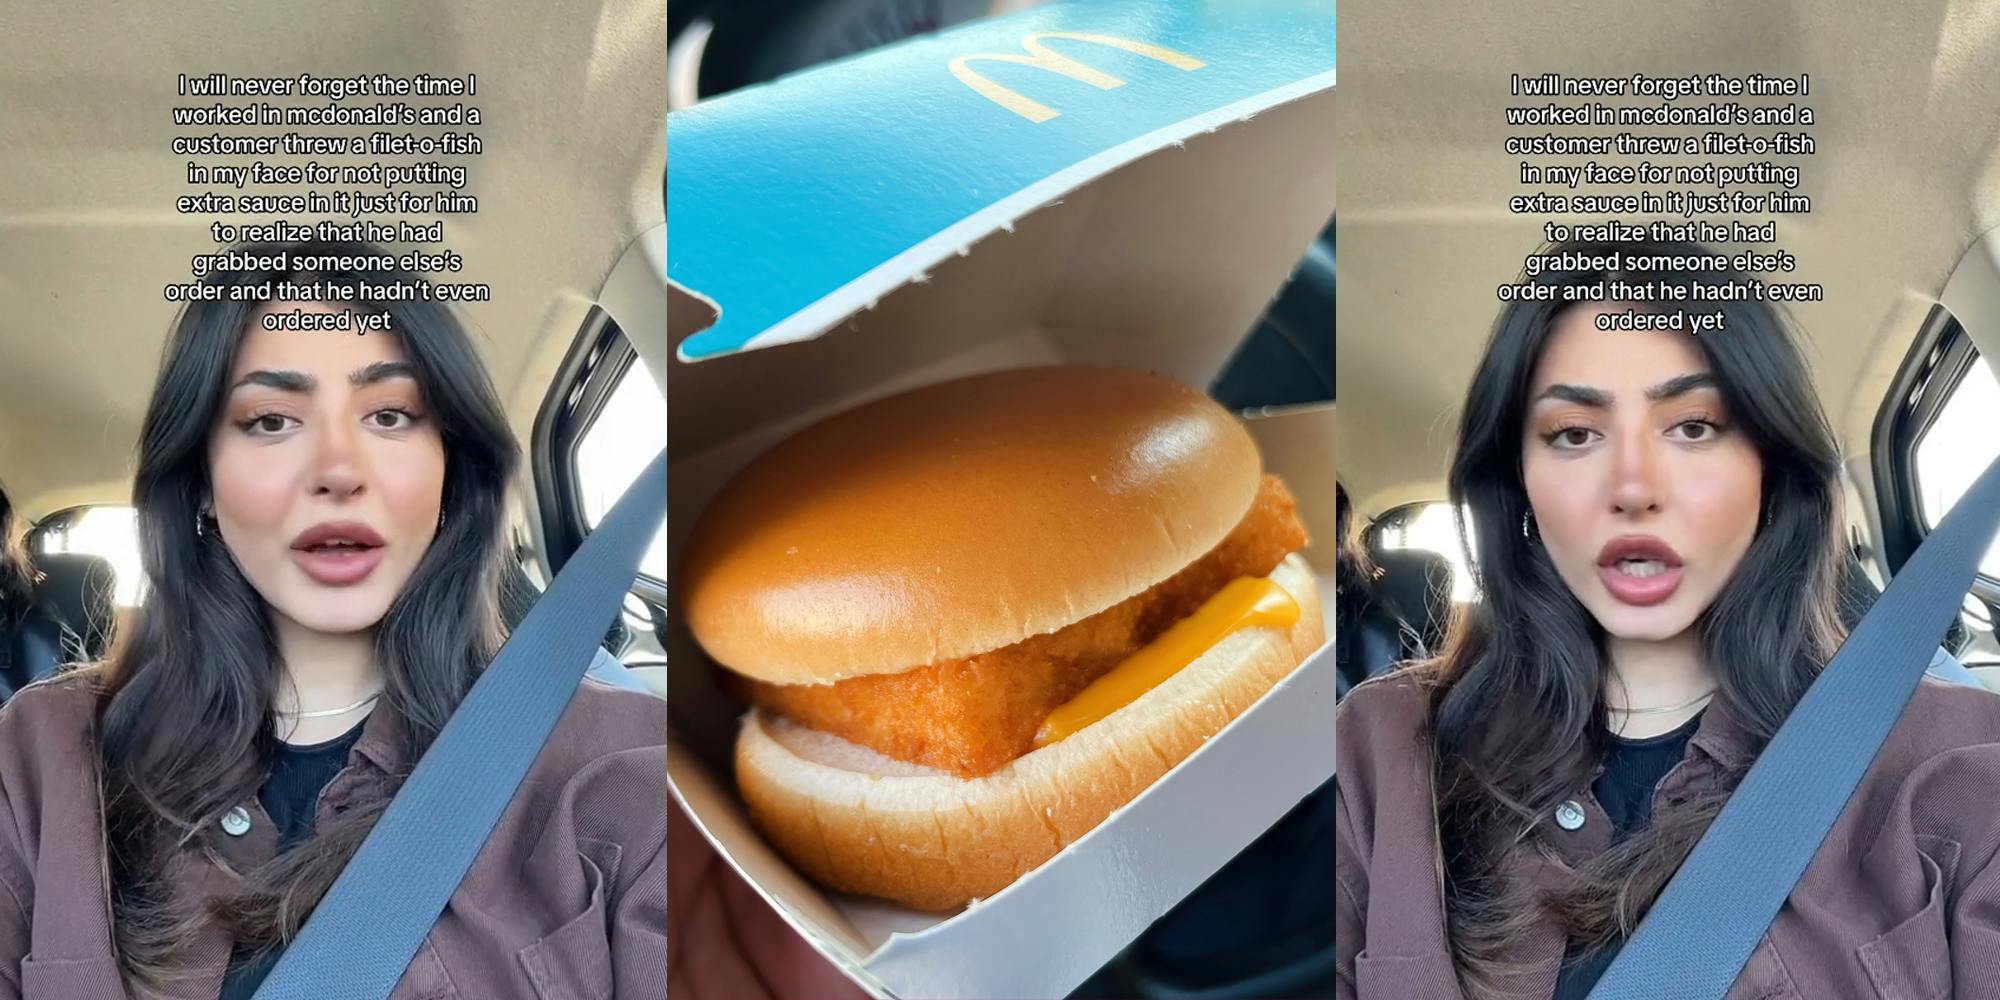 McDonald's worker speaking in car with caption "I will never forget the time I worked in mcdonald's and a customer threw a fillet-o-fish in my face for not putting extra sauce in it just for him to realize that he had someone else's order and that he hadn't even ordered yet" (l) McDonald's Fillet-O-Fish in hand in car (c) McDonald's worker speaking in car with caption "I will never forget the time I worked in mcdonald's and a customer threw a fillet-o-fish in my face for not putting extra sauce in it just for him to realize that he had someone else's order and that he hadn't even ordered yet" (r)